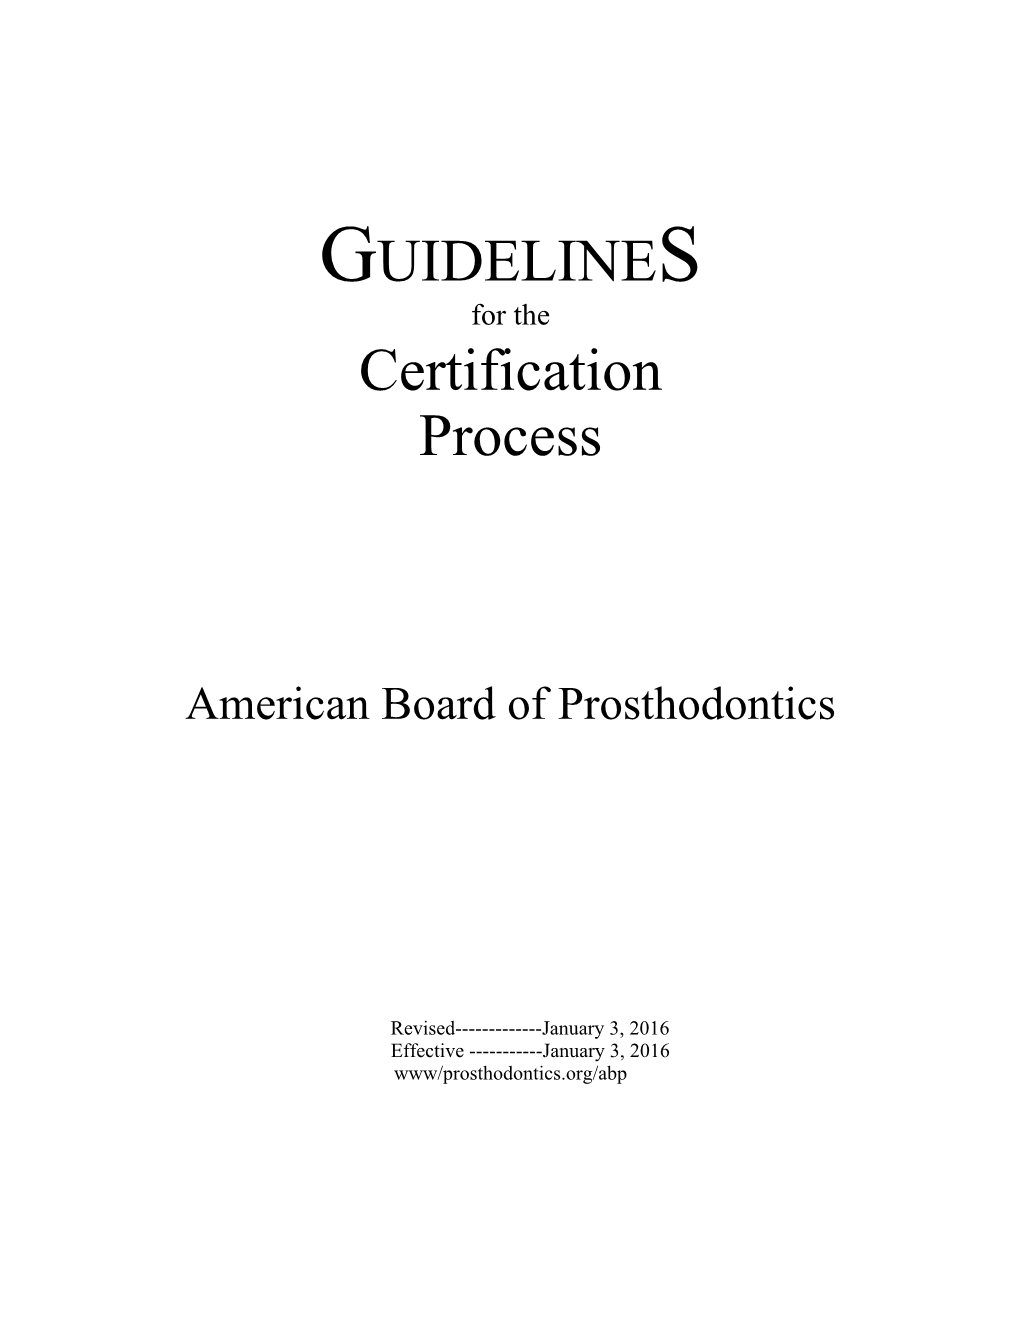 GUIDELINES Certification Process